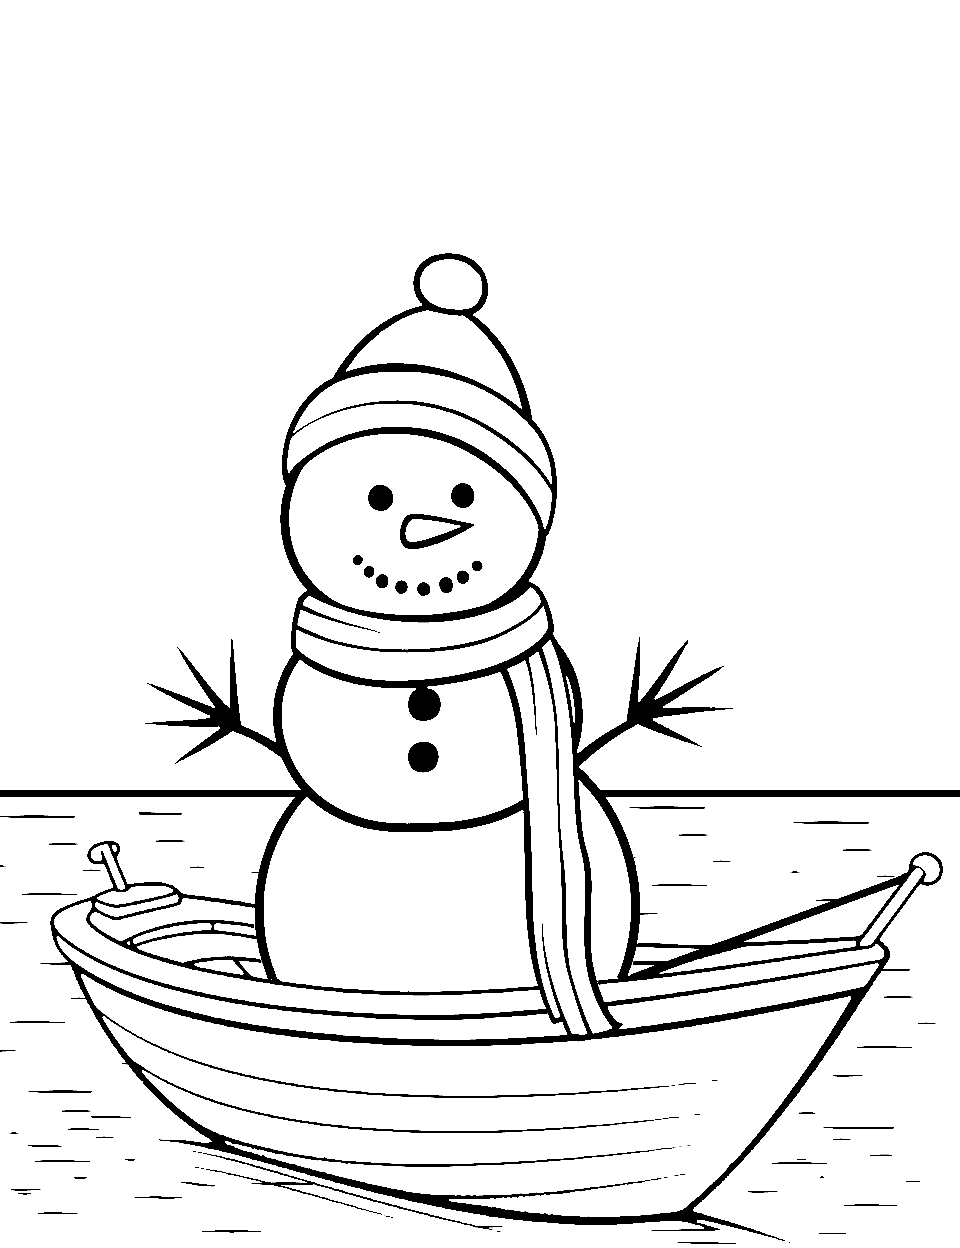 Snowman Sailor on a Boat Coloring Page - A snowman on a small boat, floating on a frozen pond.